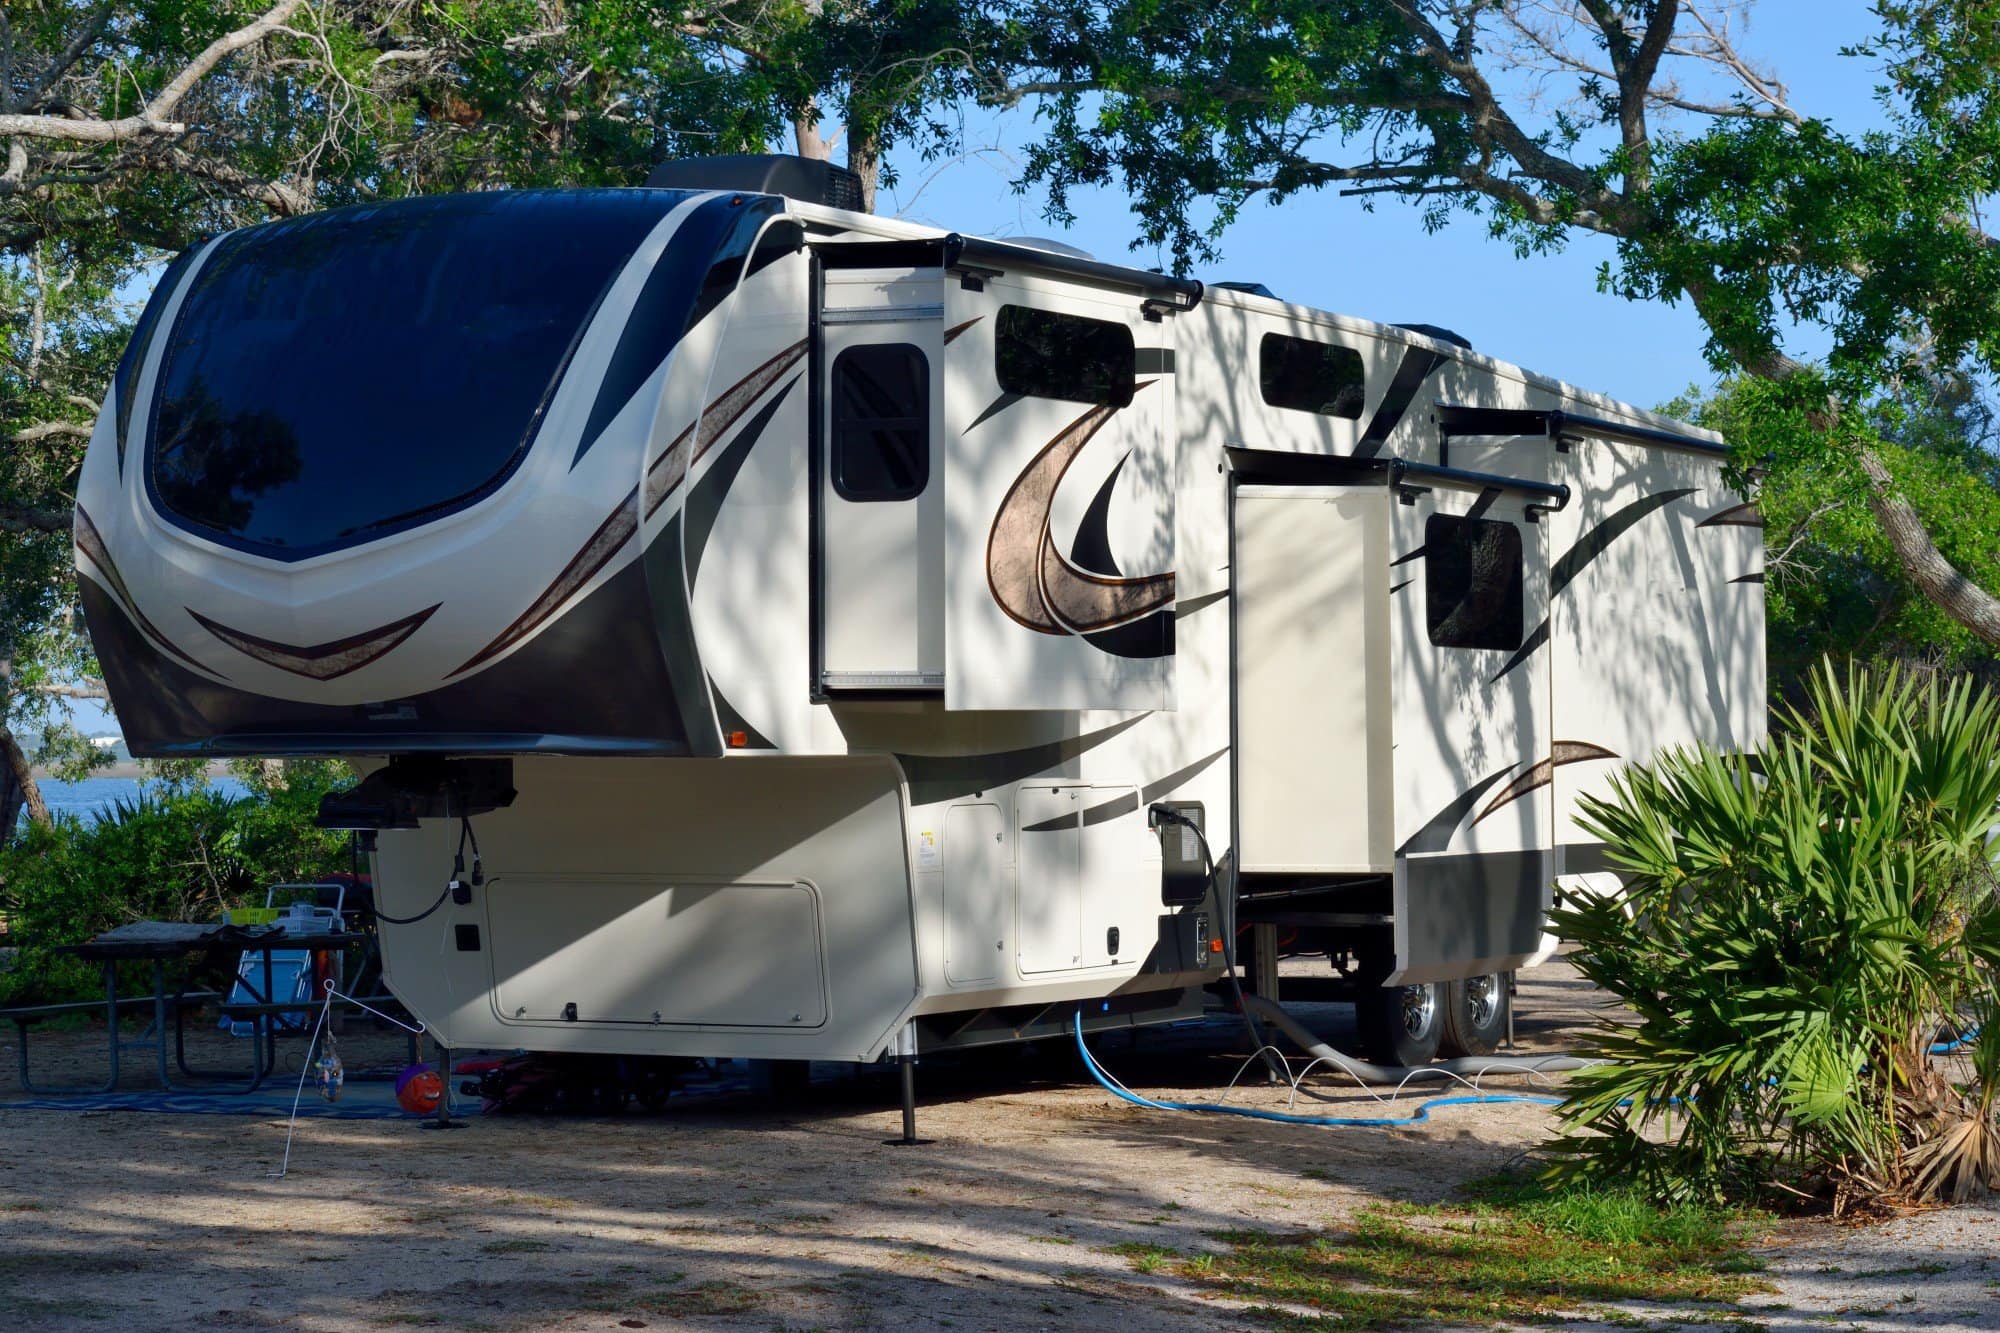 Mobile Detailing for Your RV